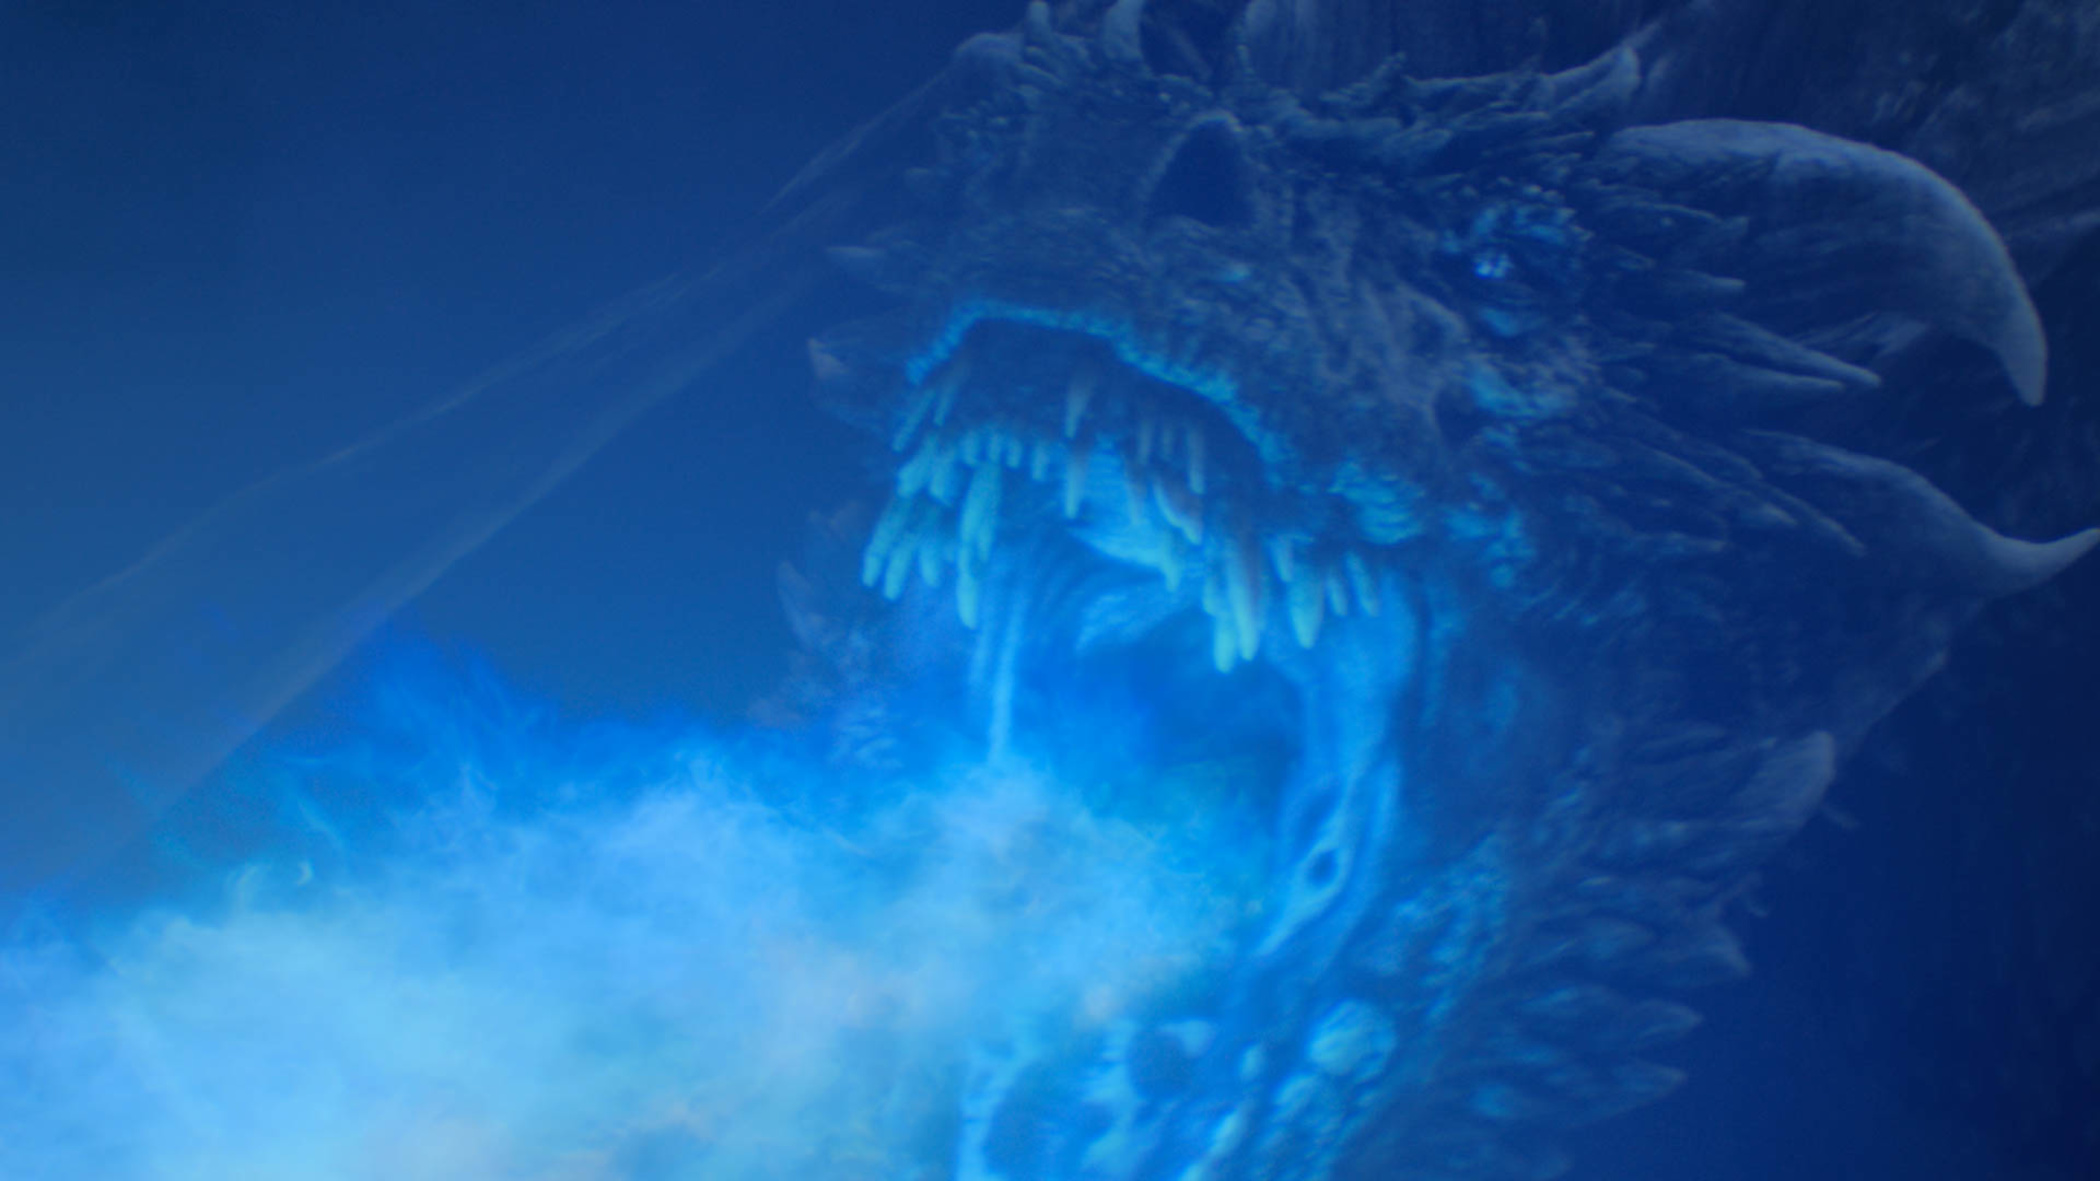 Viserion fights the living dragons in the Battle of Winterfell on Game of Thrones season 8 episode 3 (Helen Sloan/HBO)